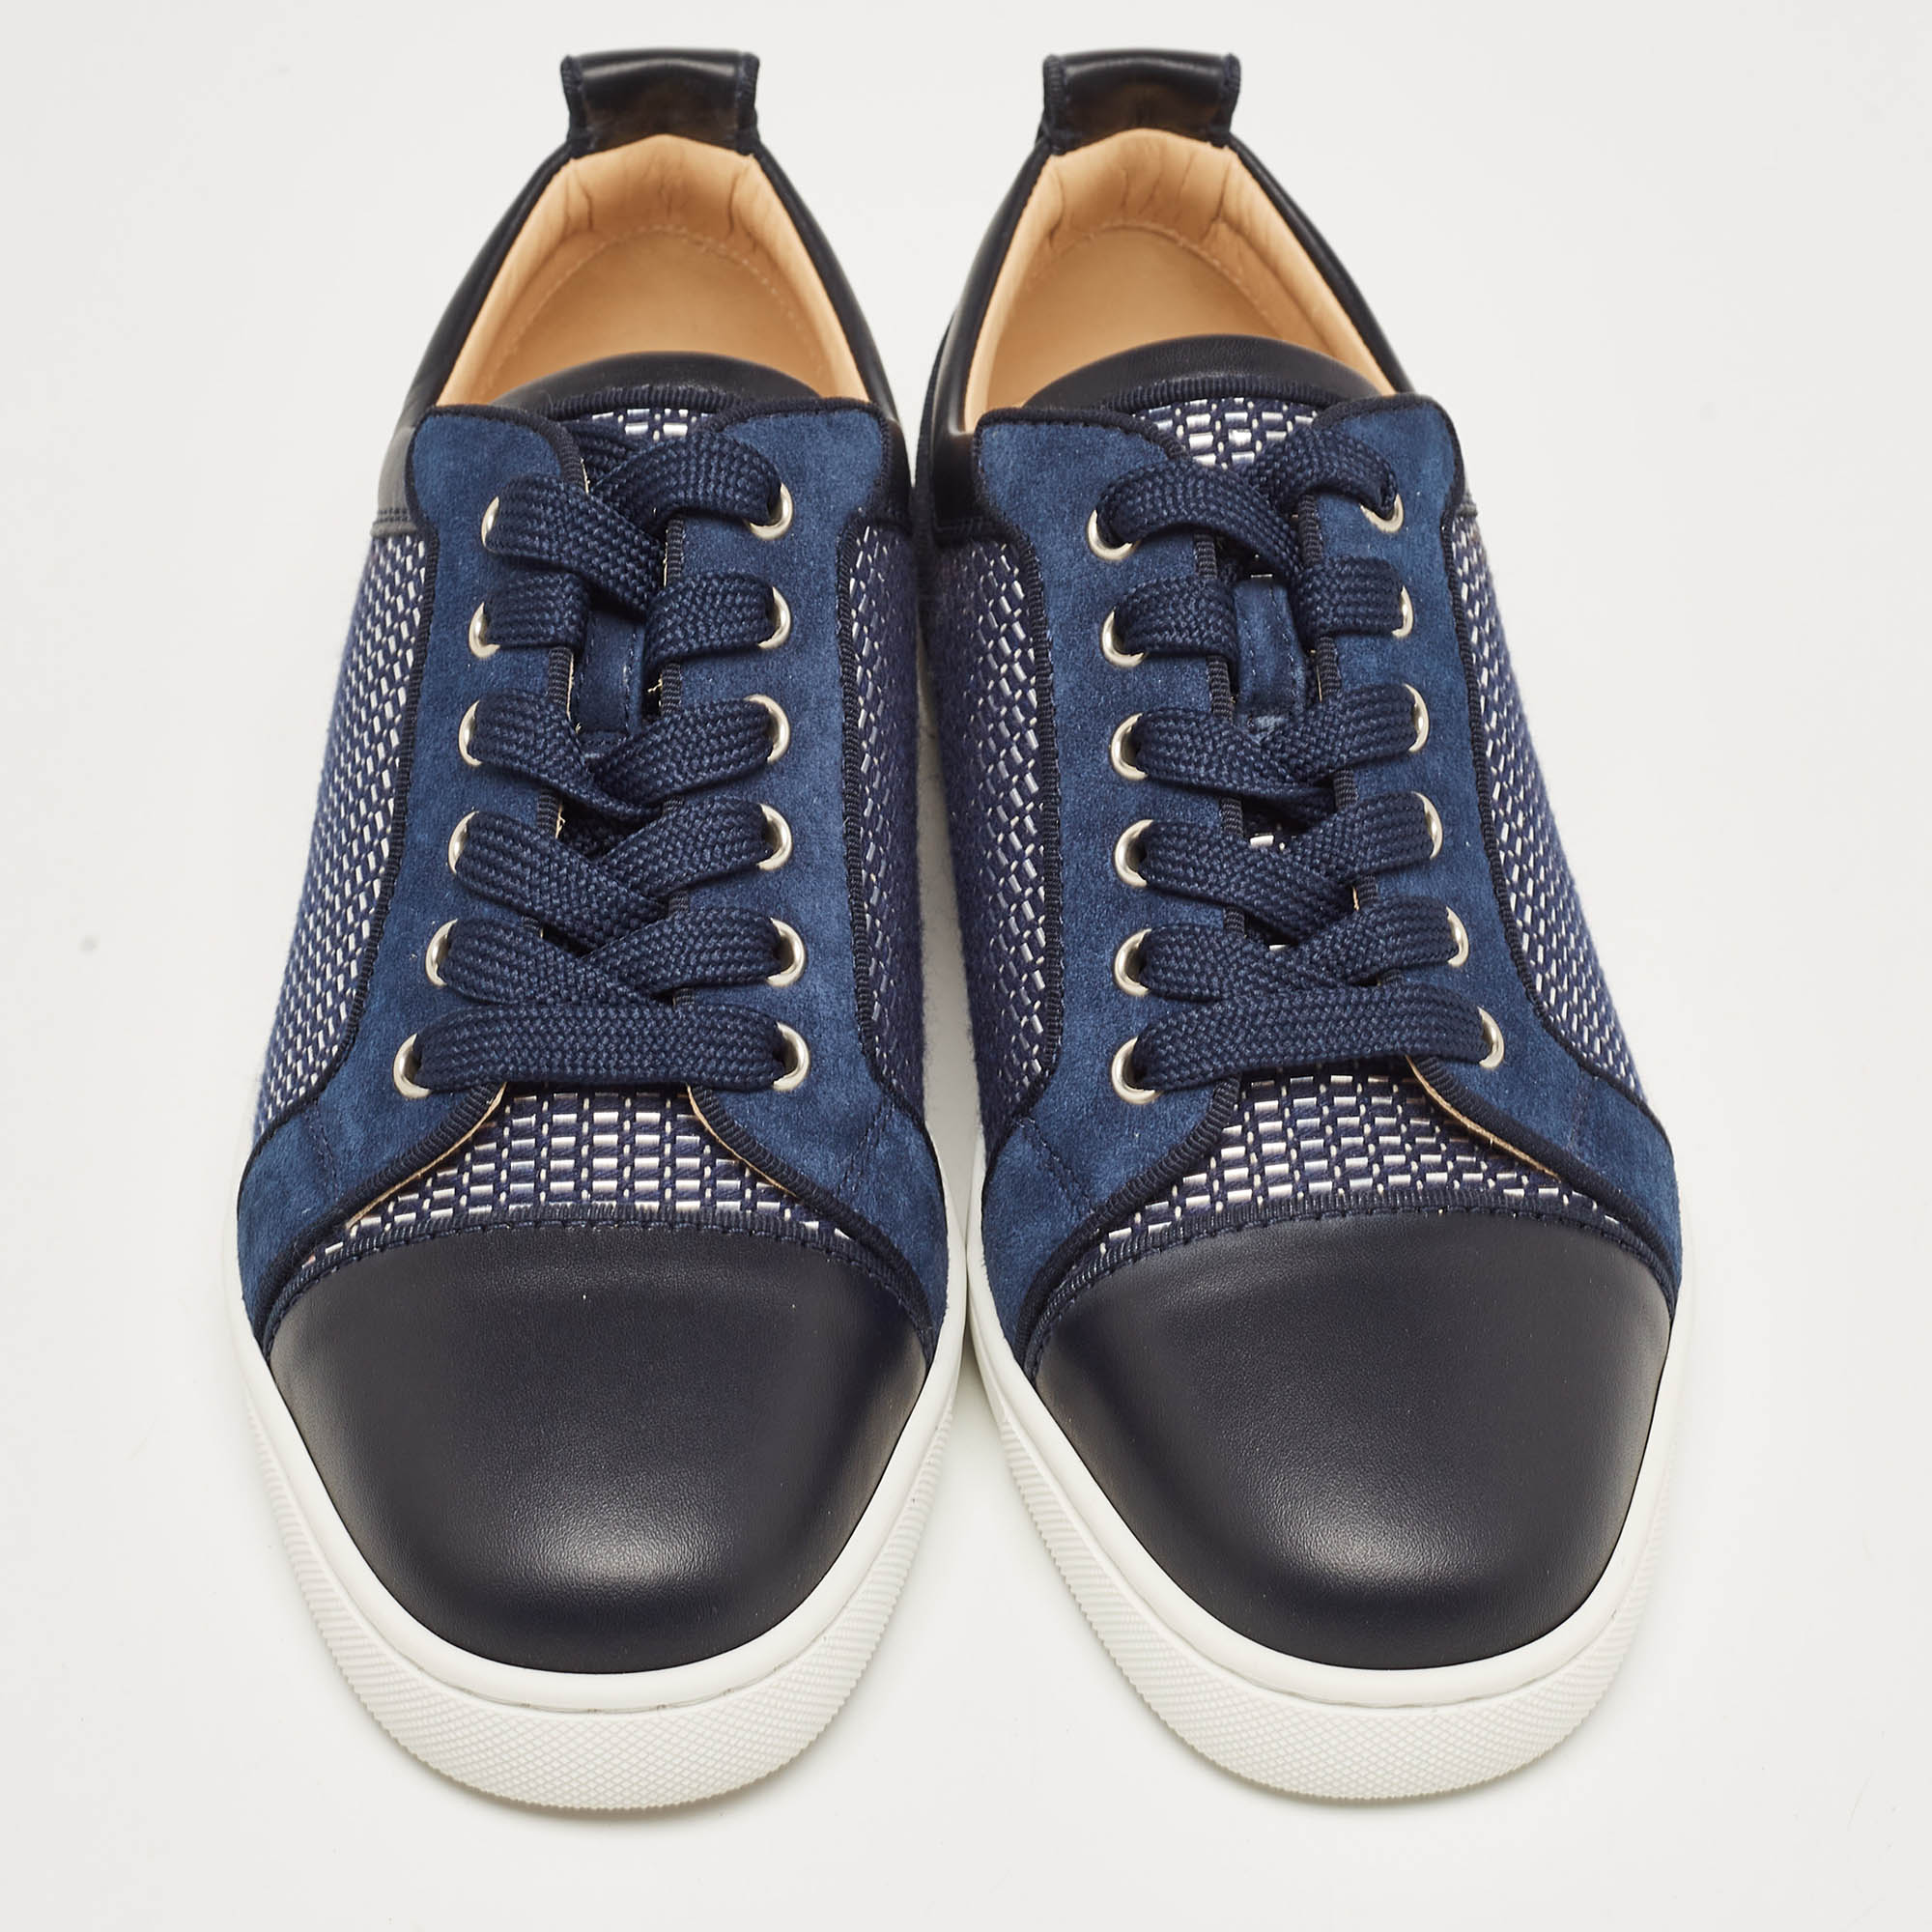 Christian Louboutin Navy Blue Leather And Suede Louis Junior Sneakers Size 39